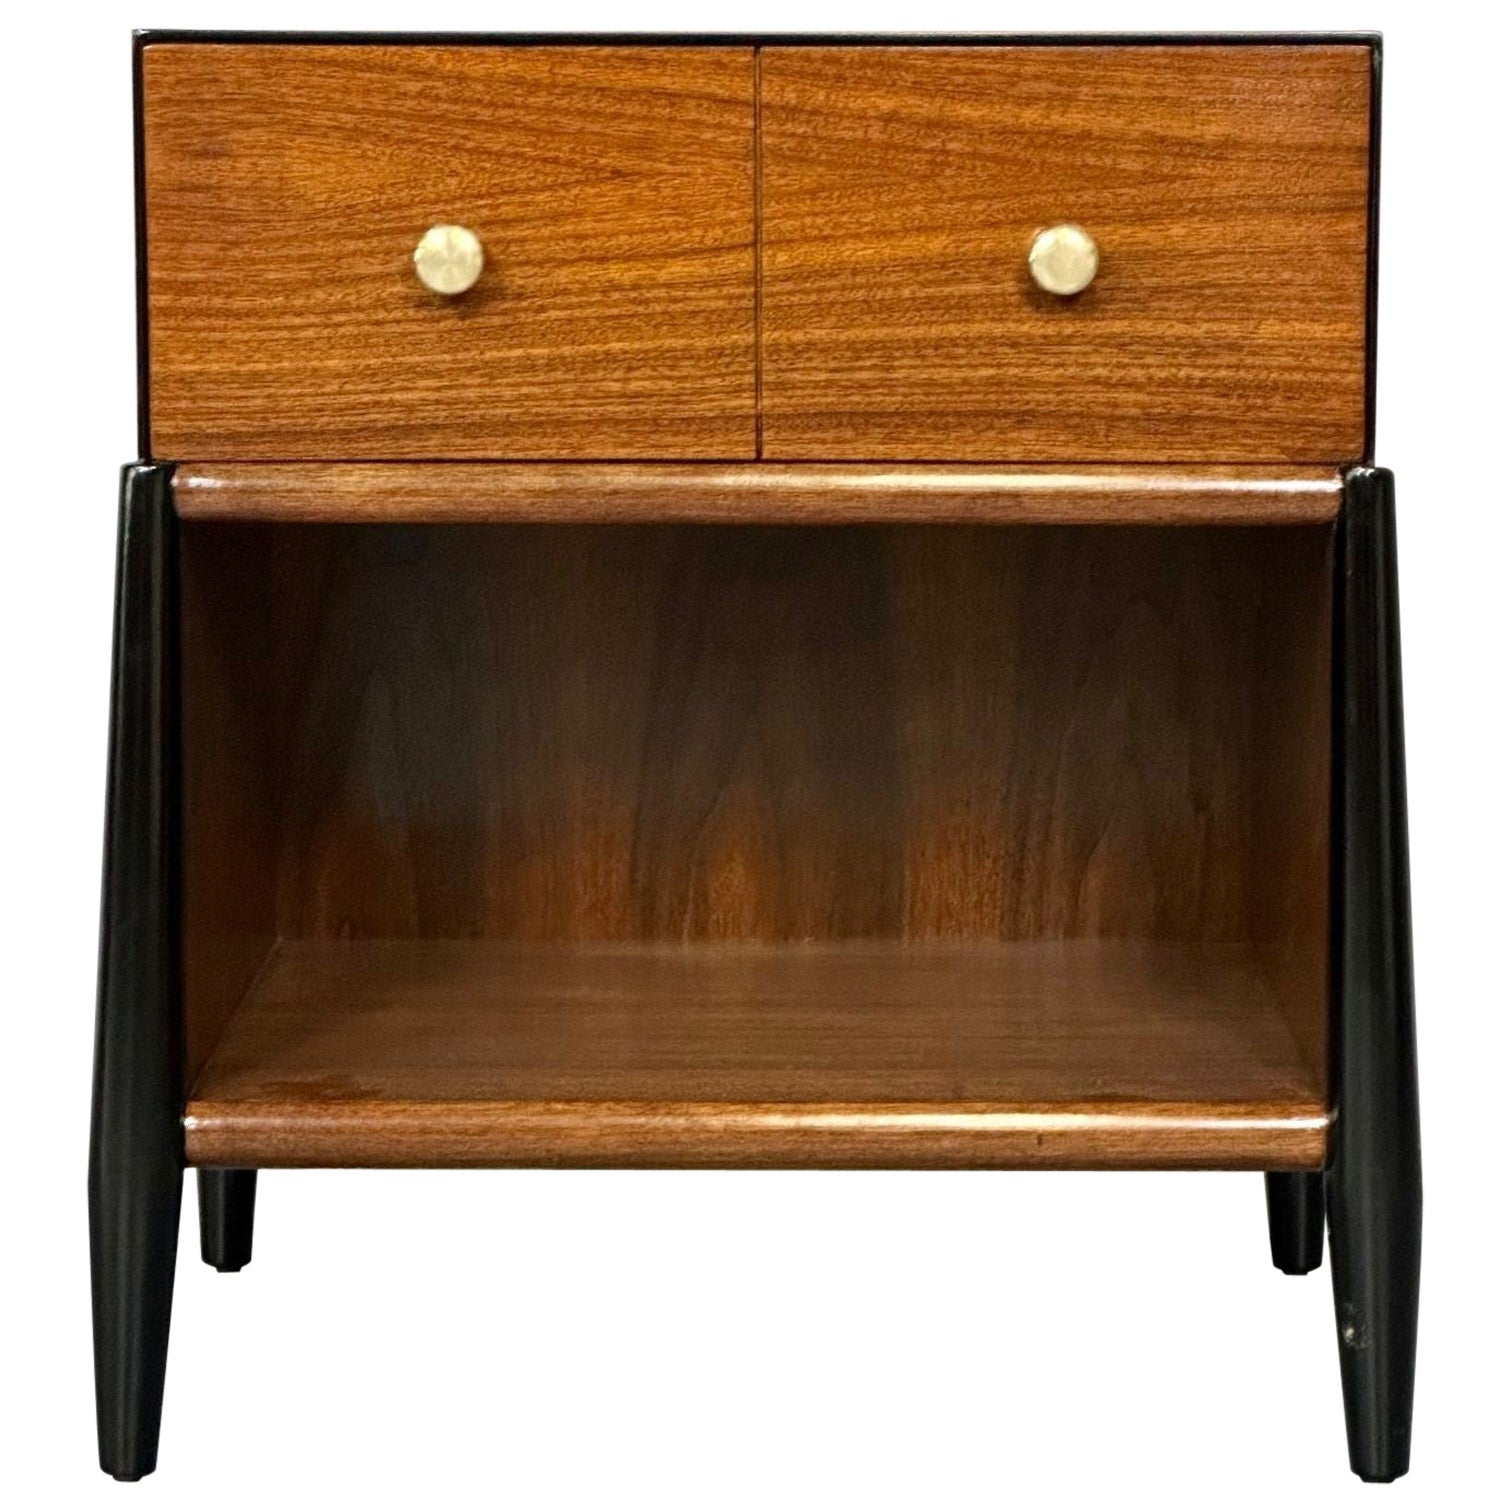 Mid-Century Modern Nightstand, End Table, West Michigan Furniture Co Frank Metz